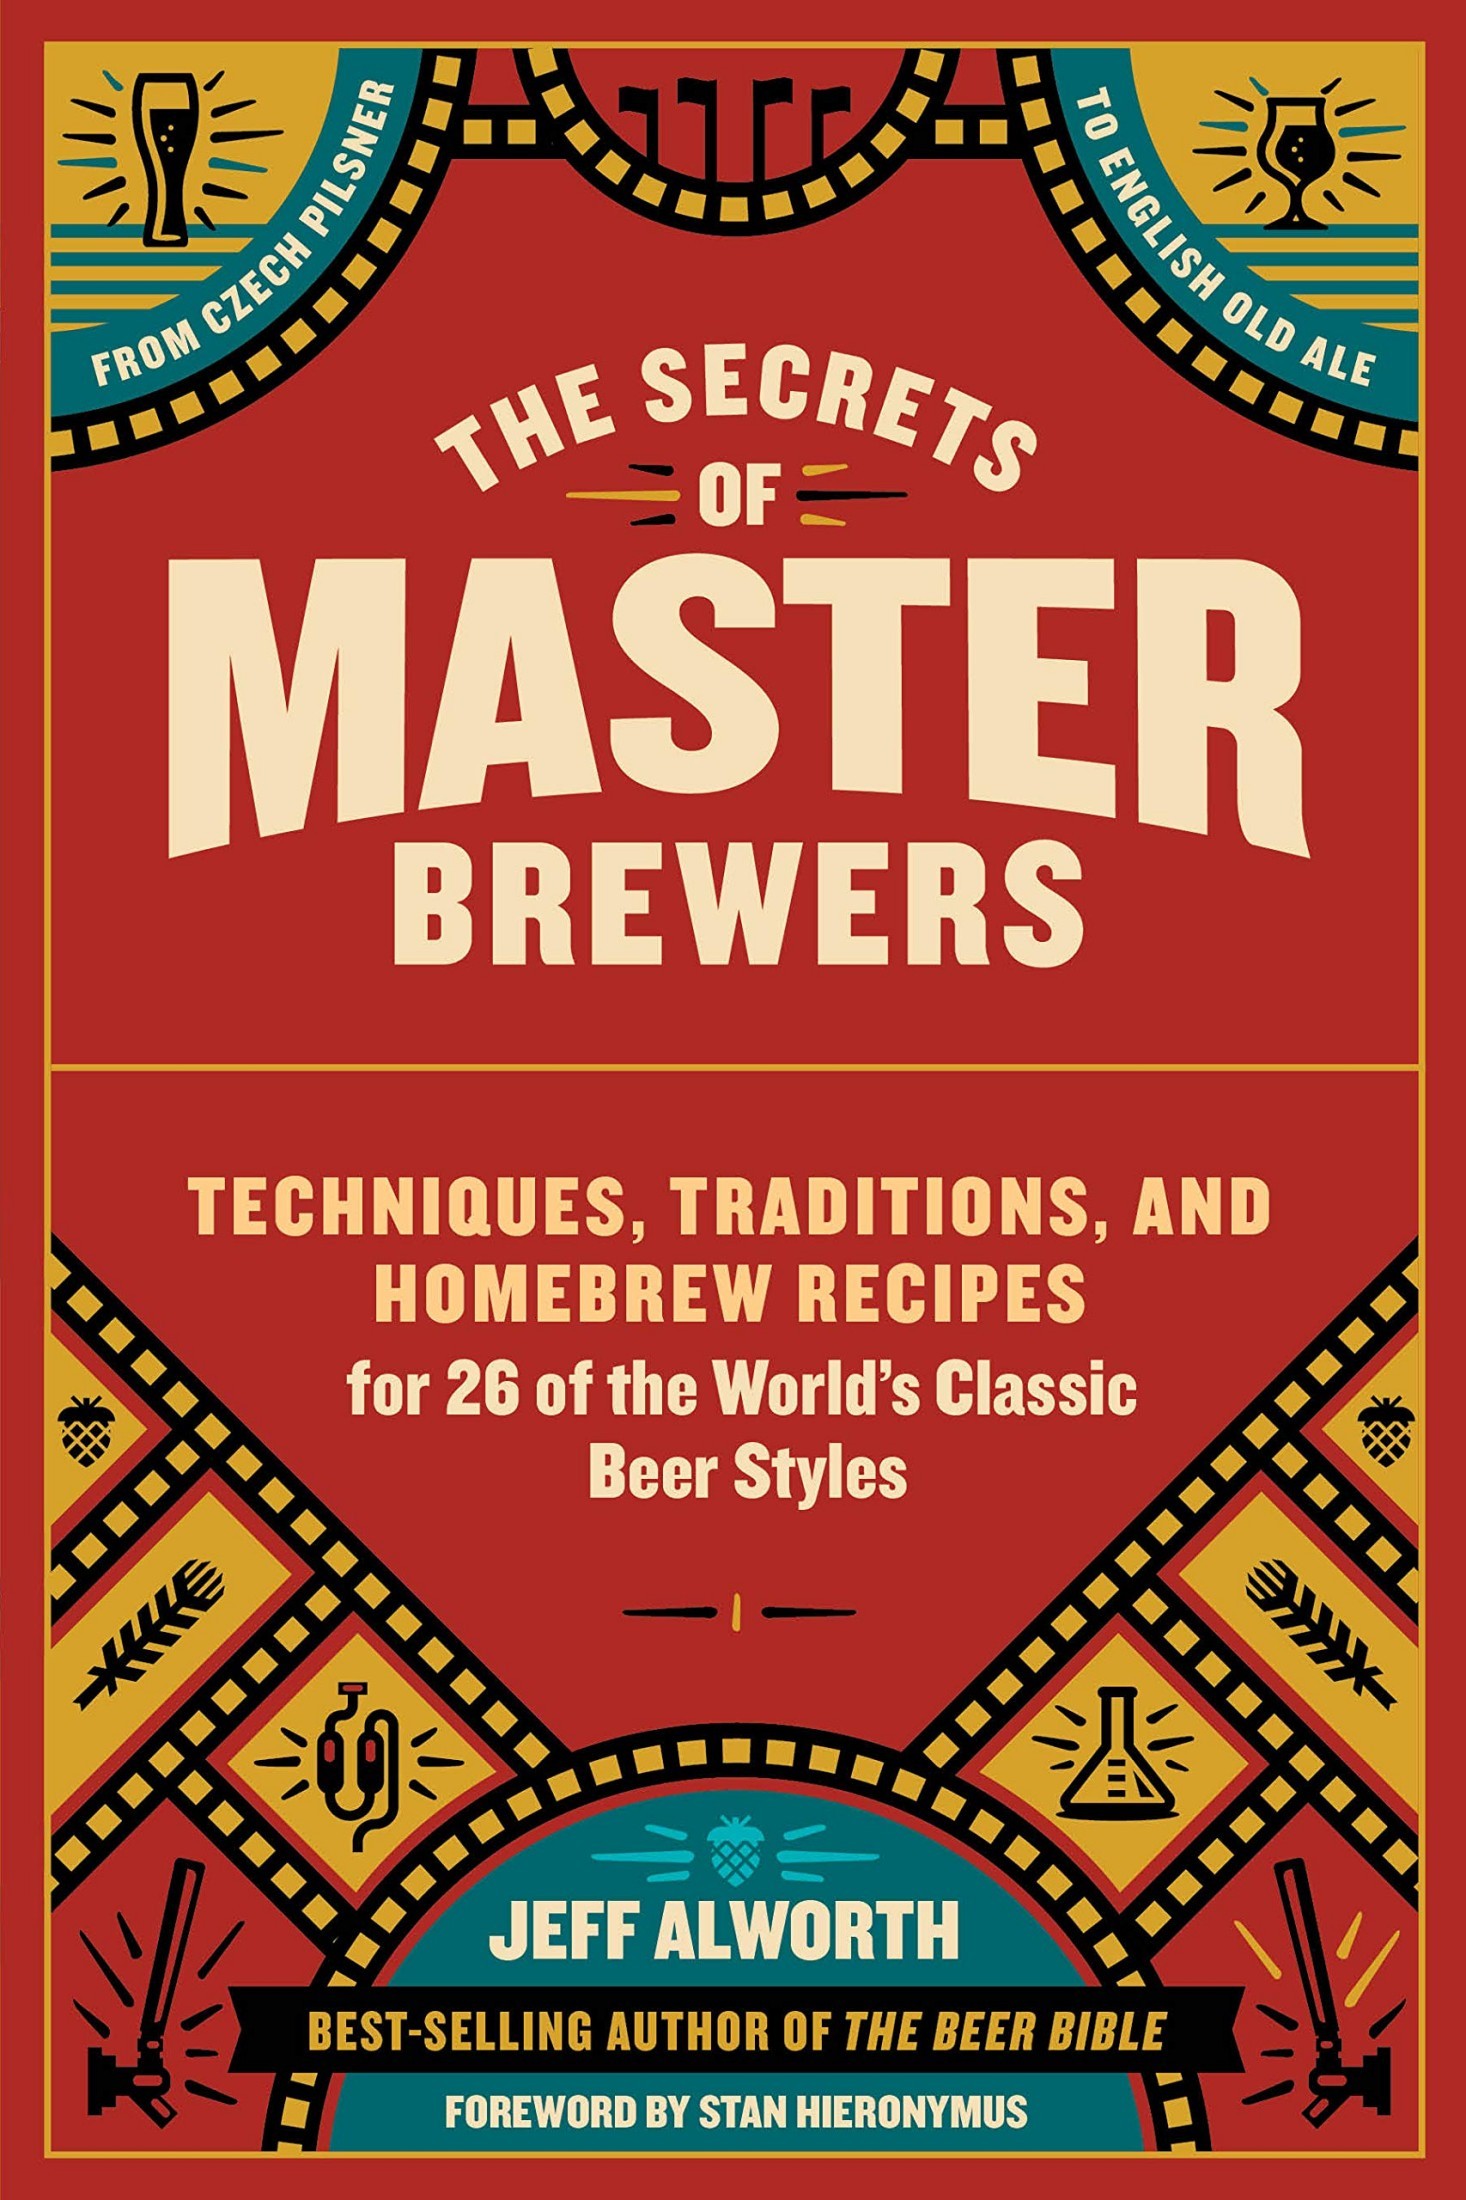 The Secrets of Master Brewers: Techniques, Traditions, and Homebrew Recipes for 26 of the World’s Classic Beer Styles, From Czech Pilsner to English Old Ale